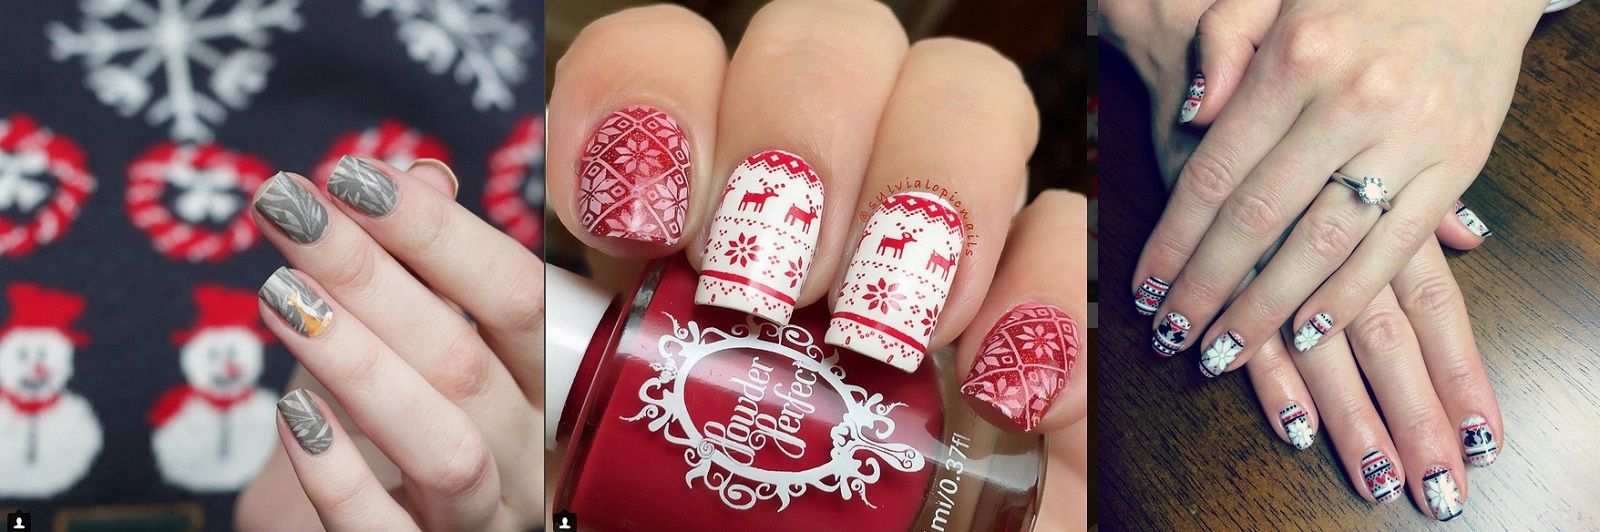 Nails trend, arrivano le Ugly Sweater Nails